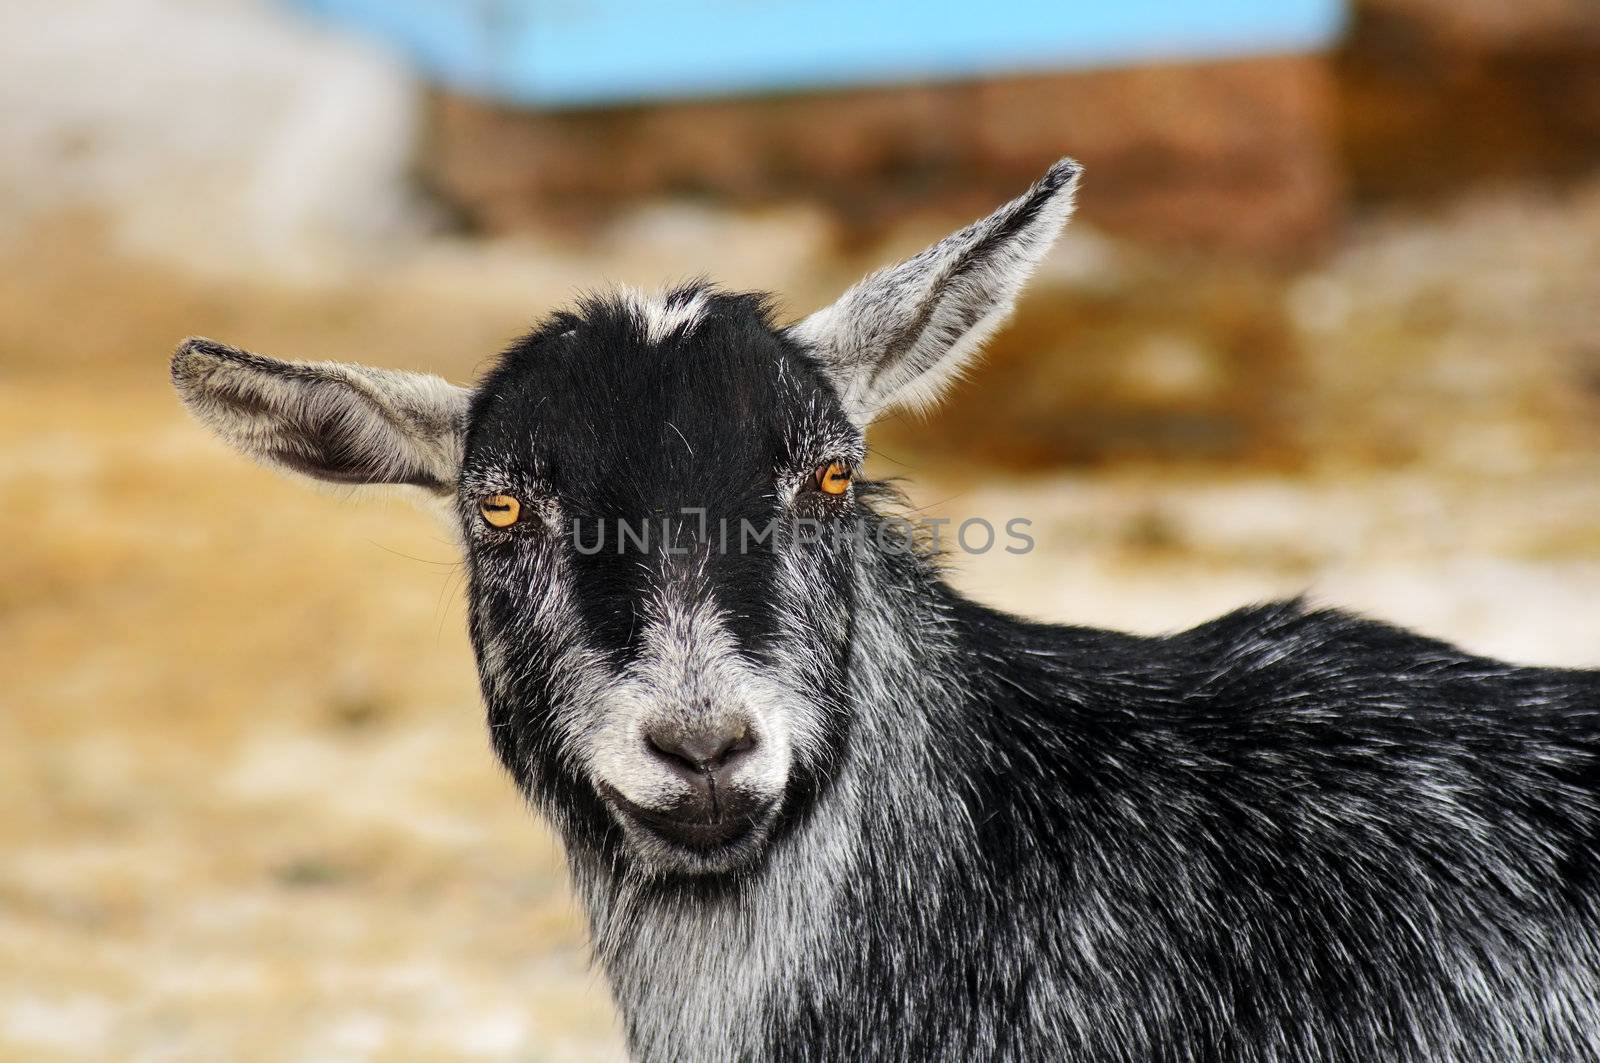 Funny looking goat by Mirage3